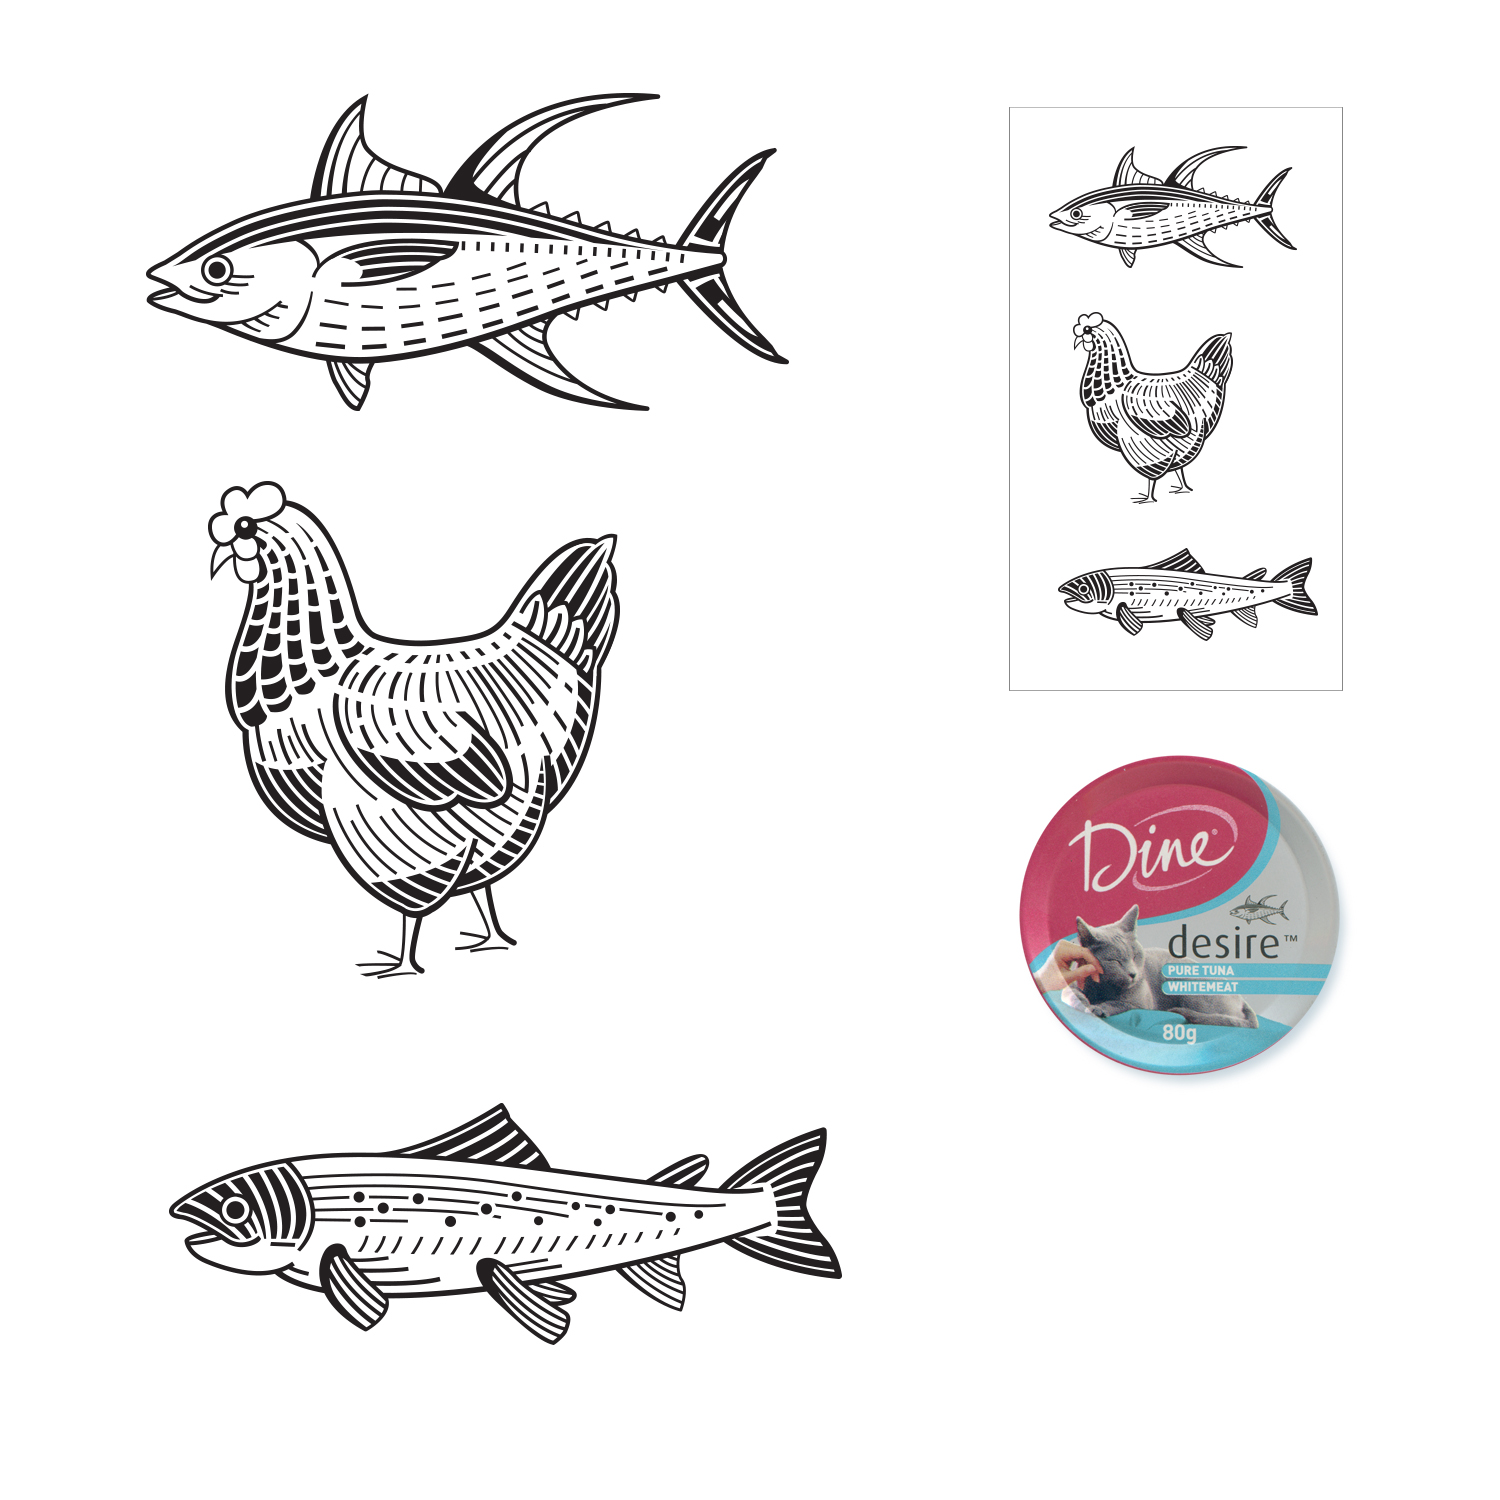  Client: COWAN Icons for Dine "Desire" cat food Digital, black and white linework 